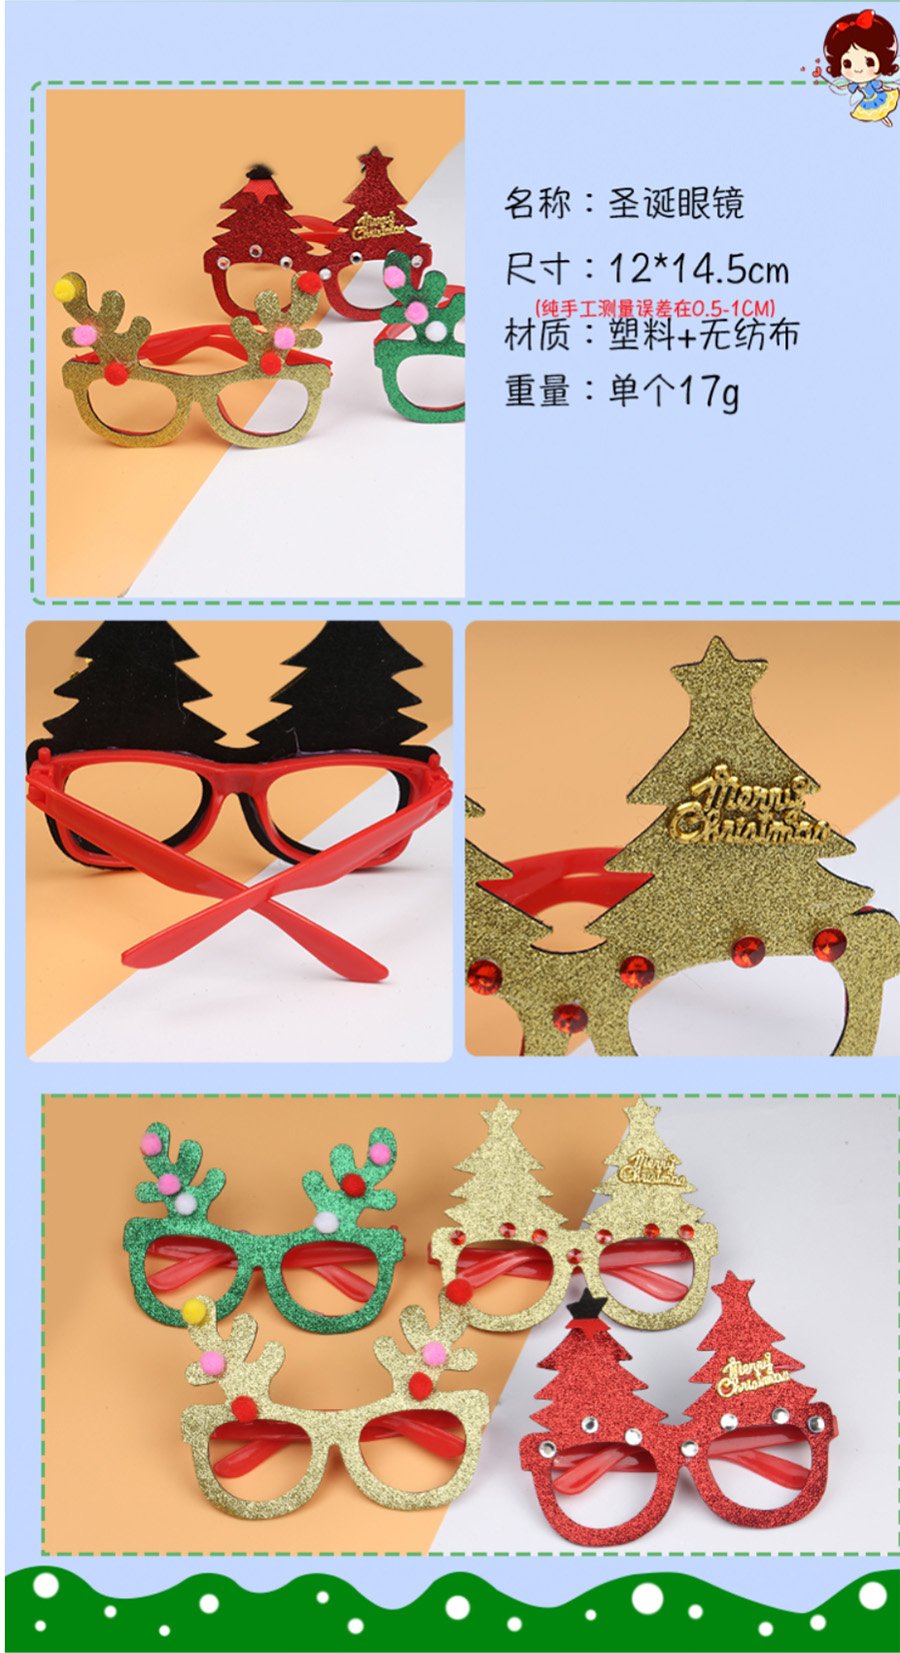 Christmas Accessories - Glasses Info